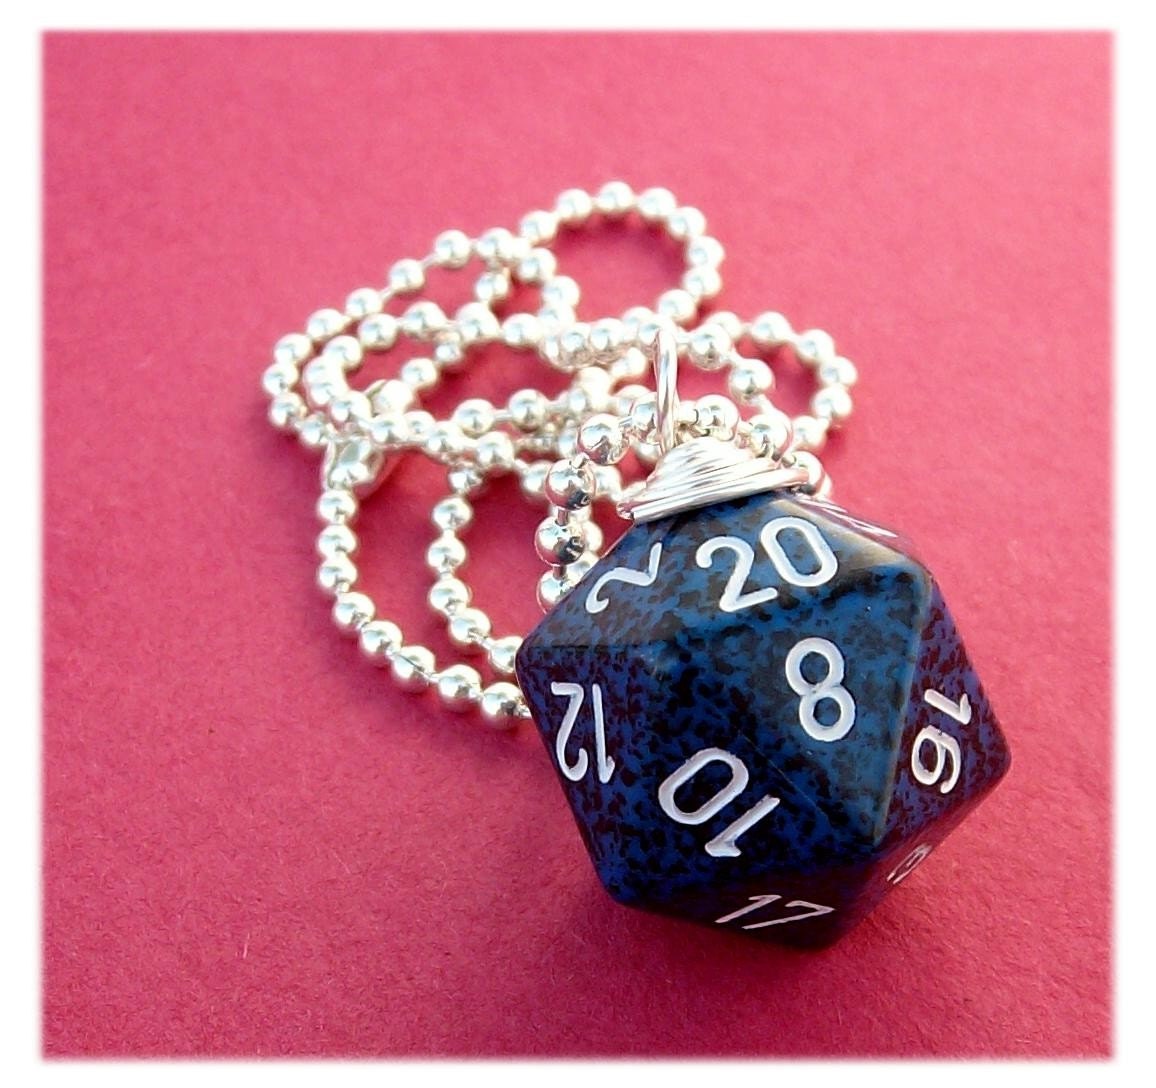 geekery, dungeons dragons, pawandclawdesigns, blue, black, d20 d 20, dice die, necklace pendant, jewelry jewellry, dnd d n d, role playing game, free shipping, international ship, silver plated